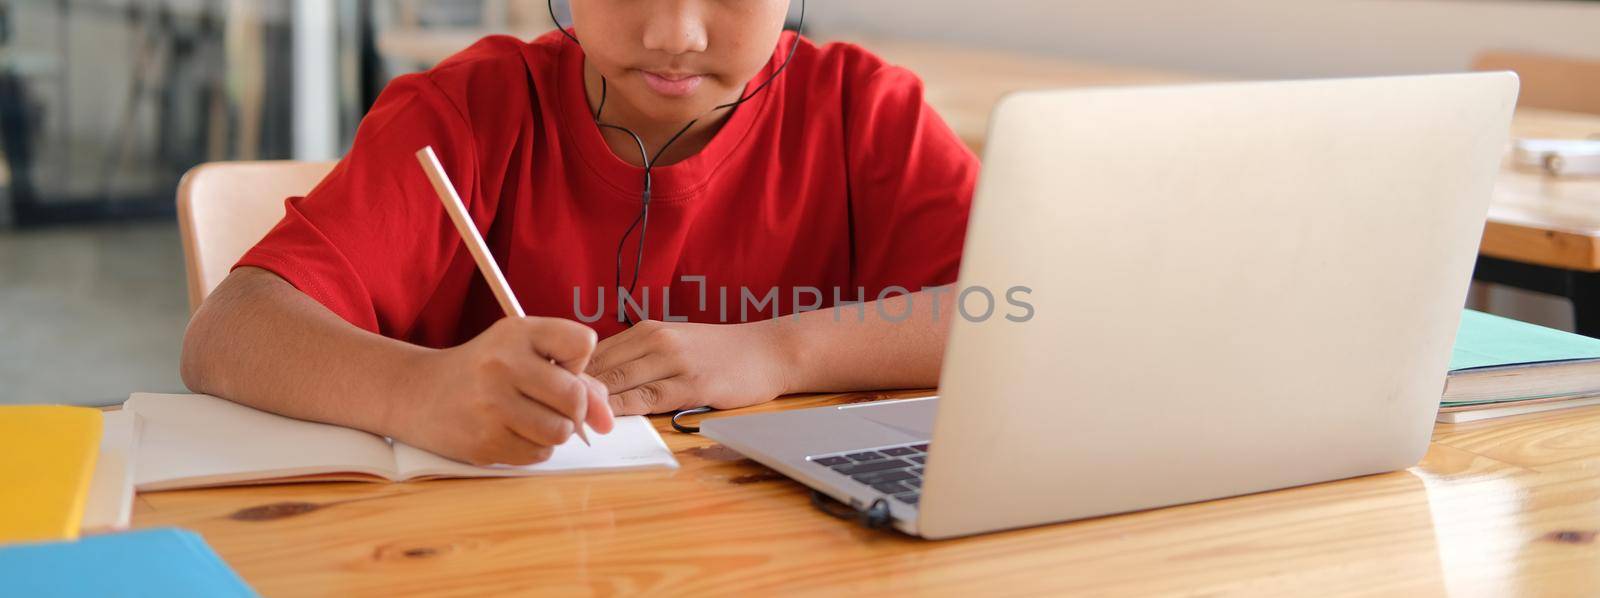 asian boy student studying learning lesson online. remote meeting distance education at home